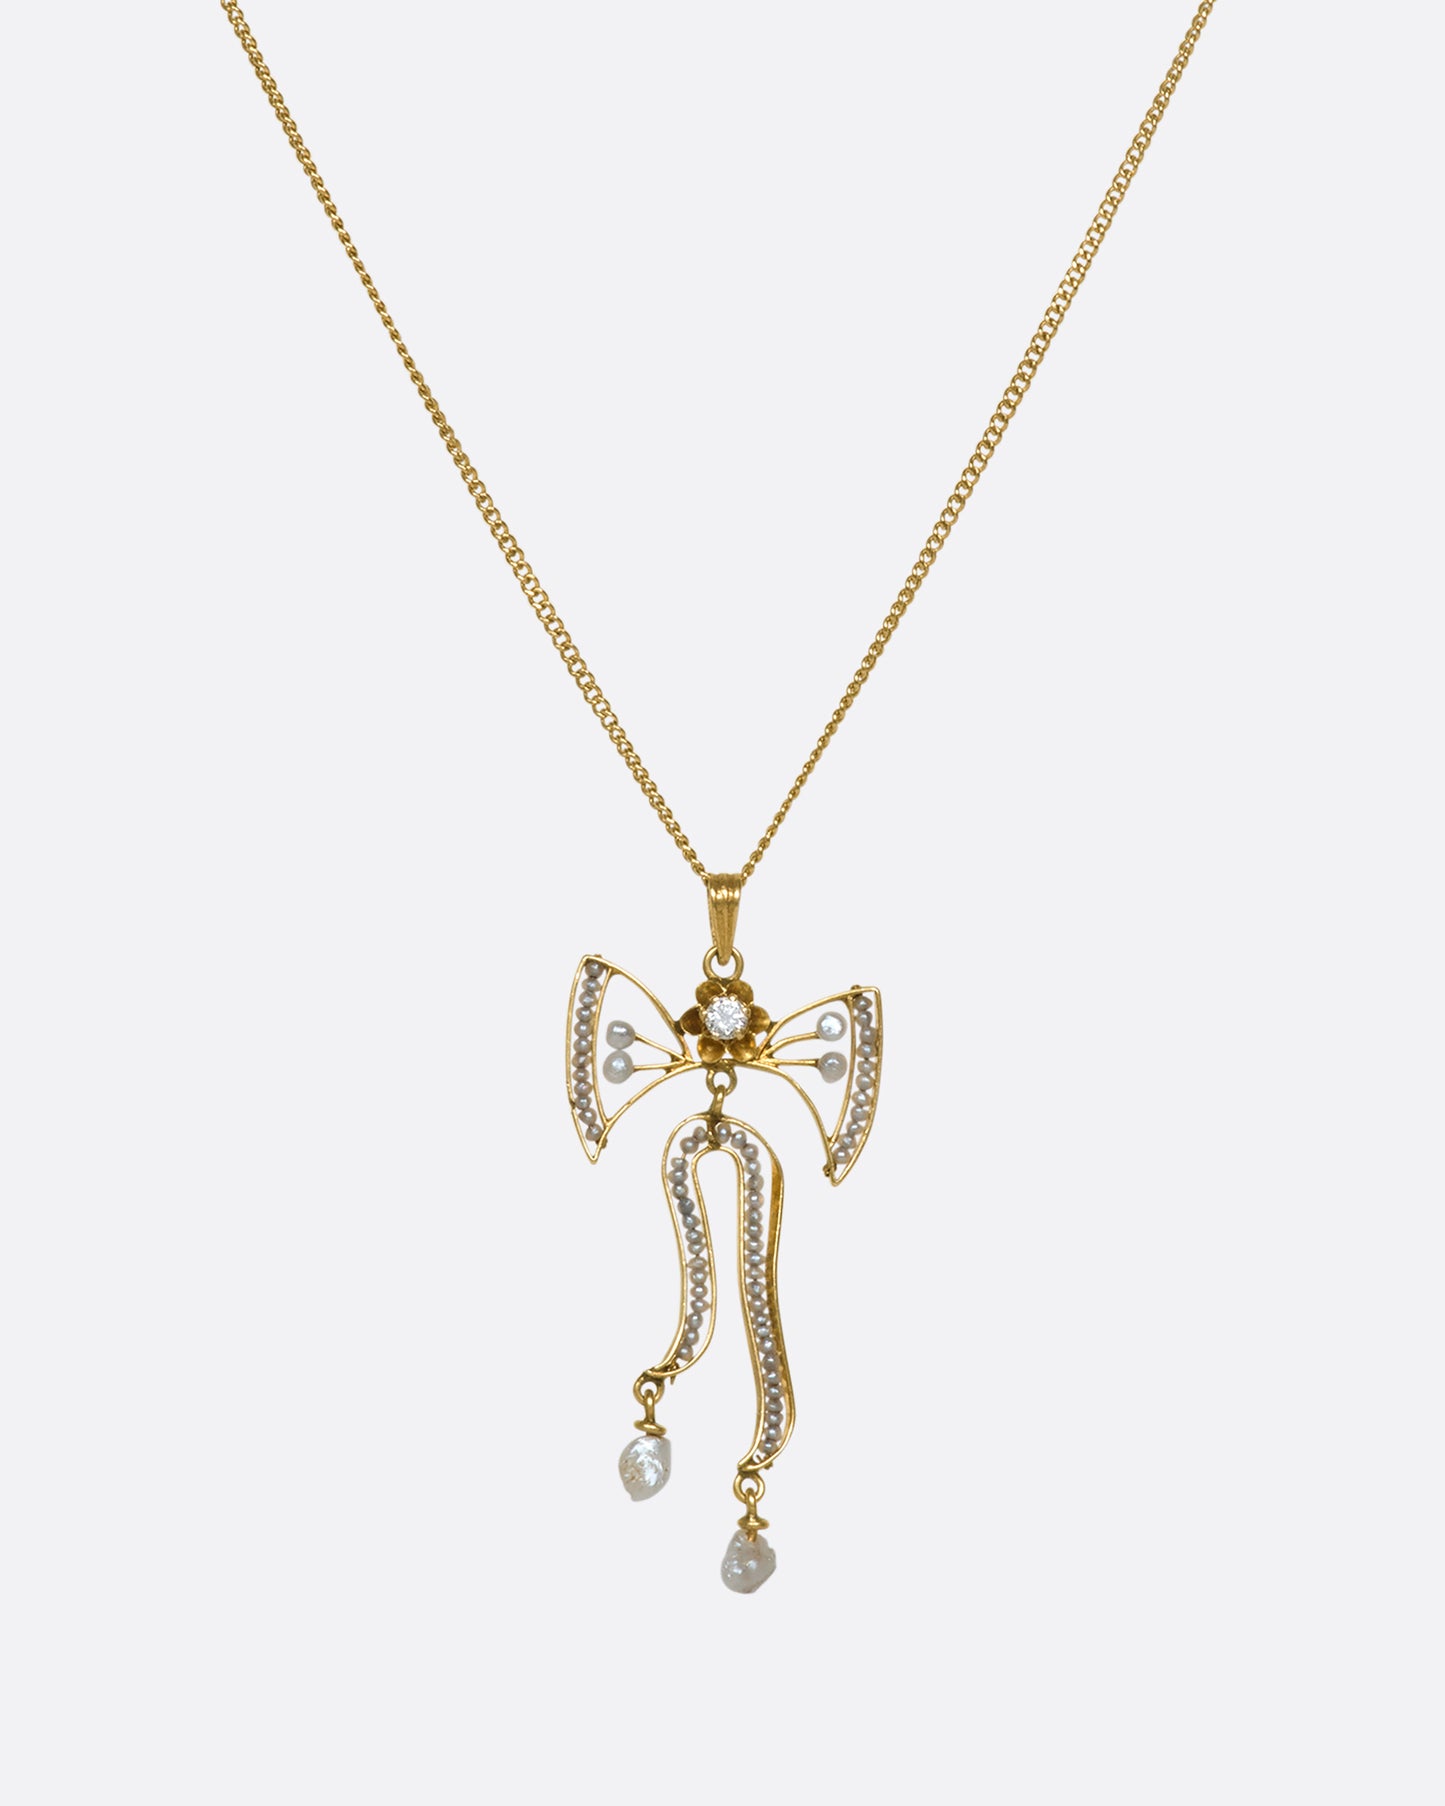 A pulled out view of a hanging yellow gold bow pendant with seed pearls and a diamond with the majority of the chain showing.